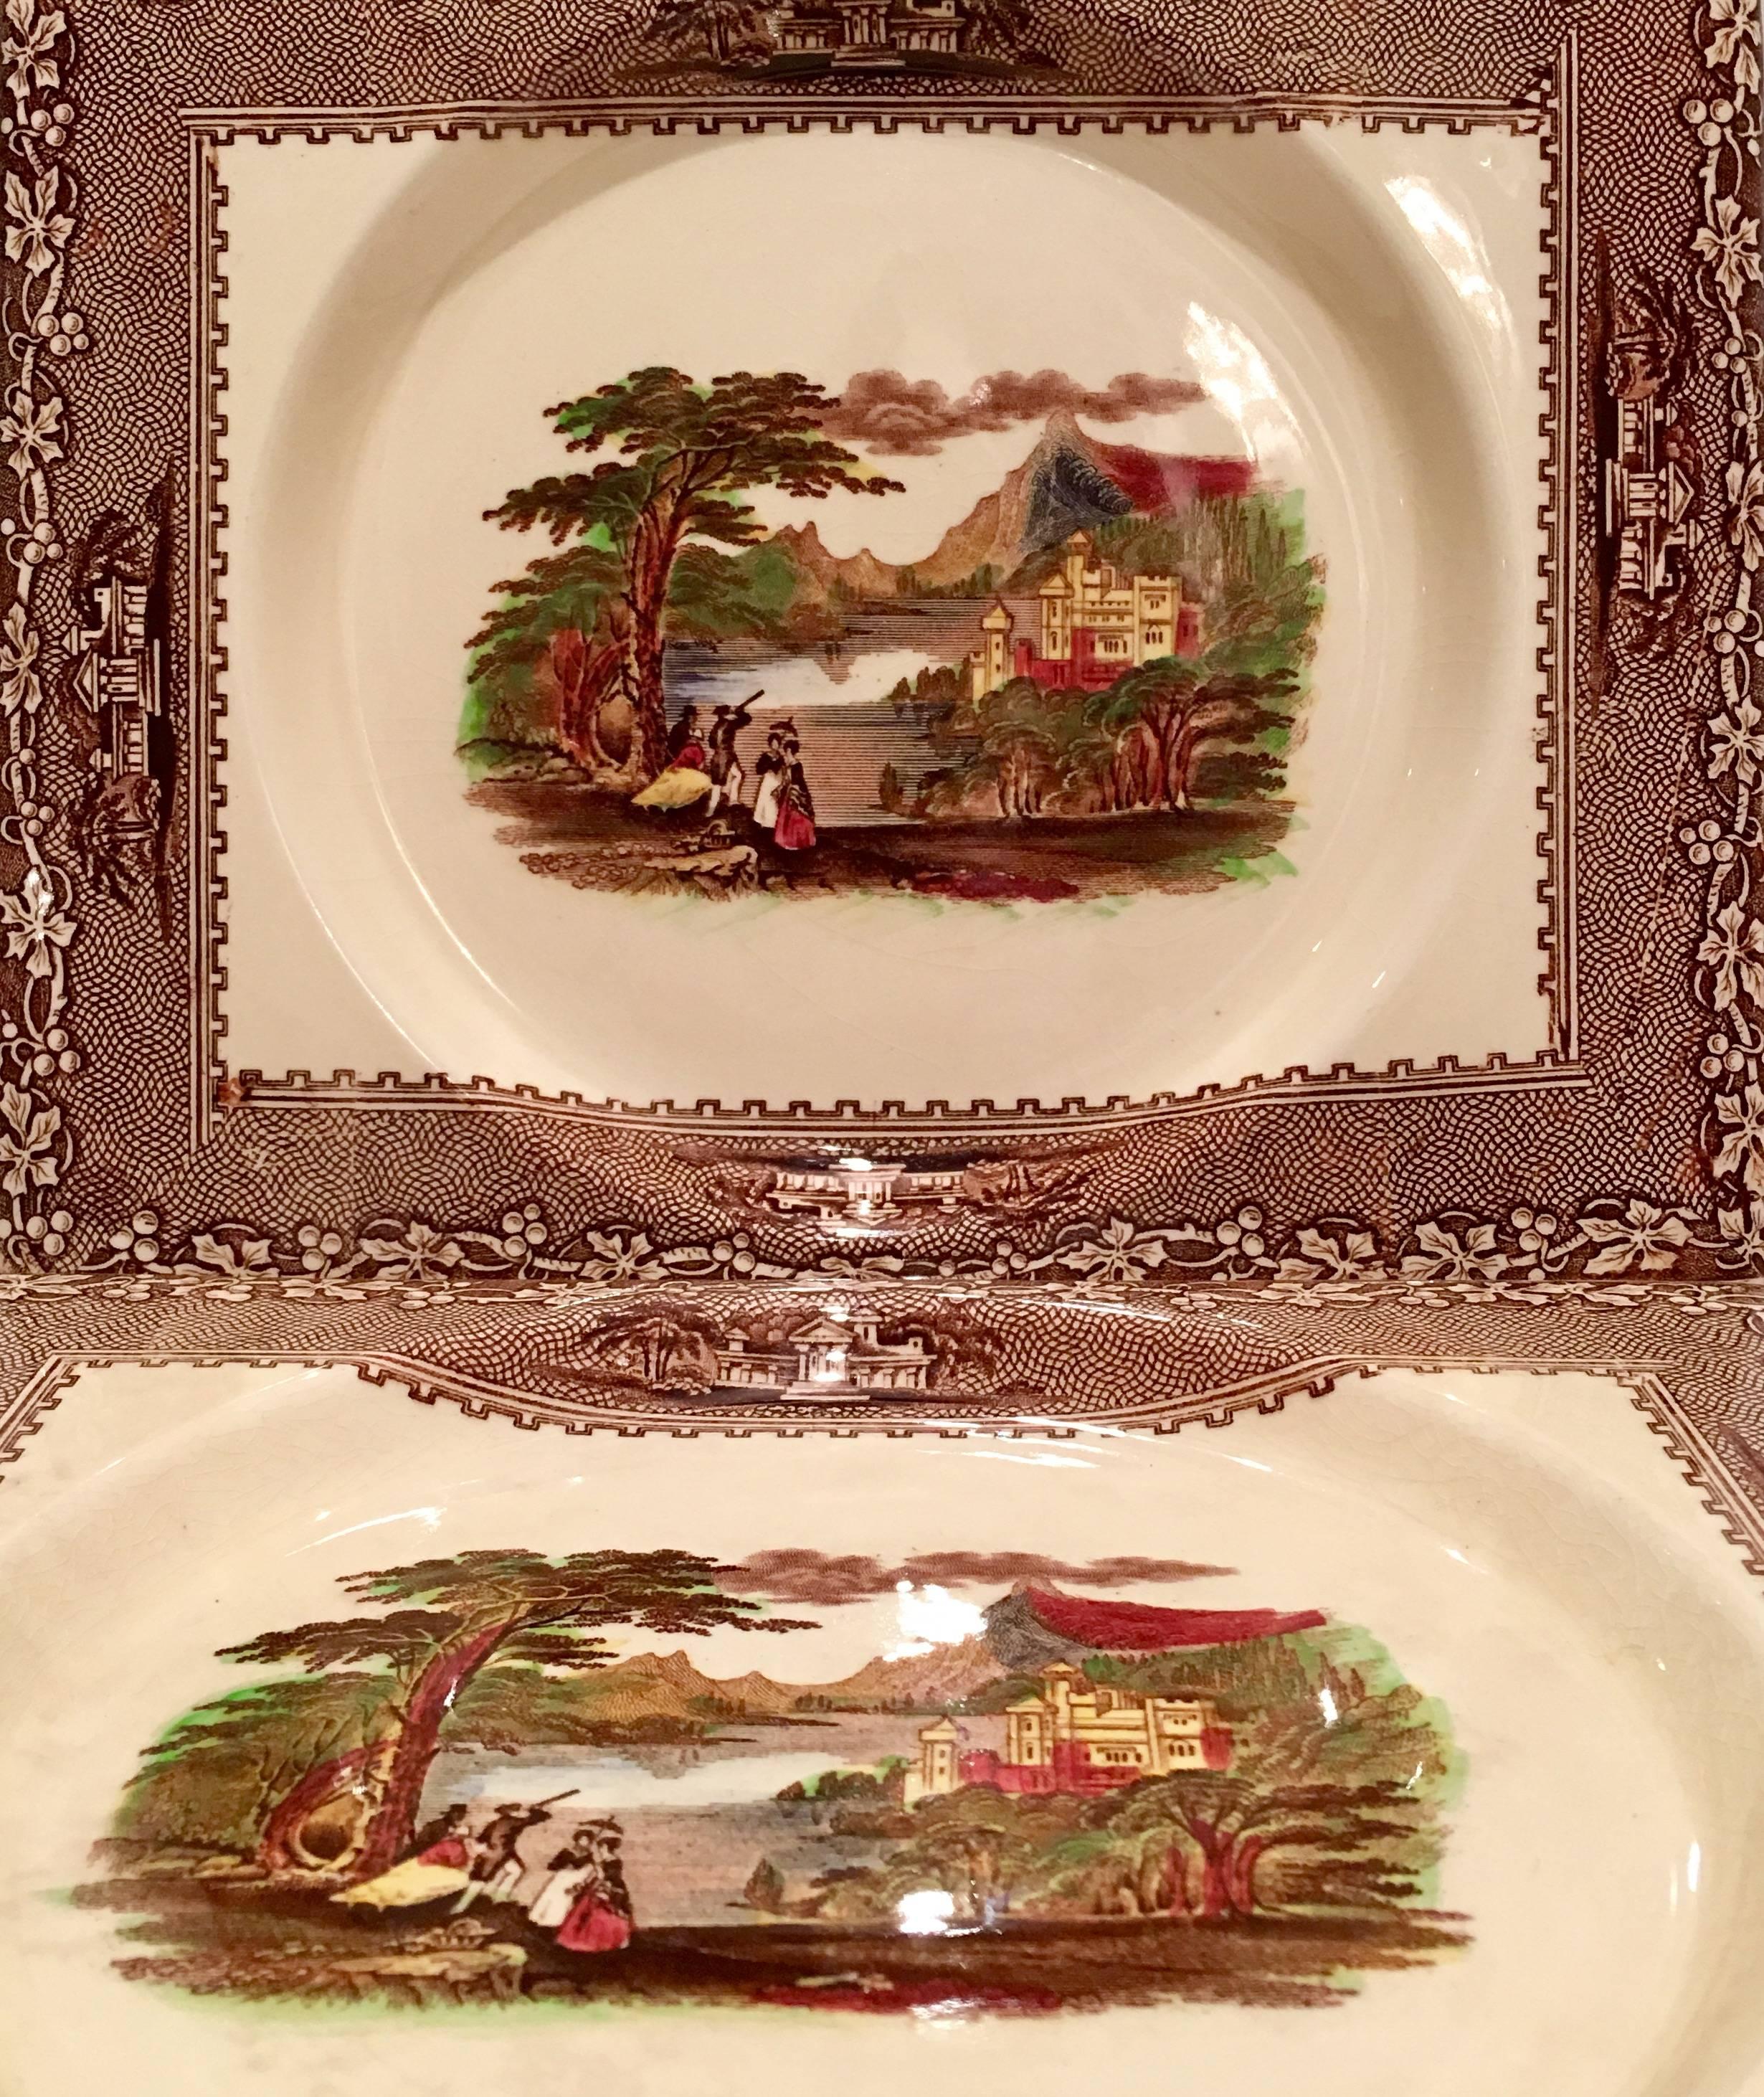 the biarritz royal staffordshire plate